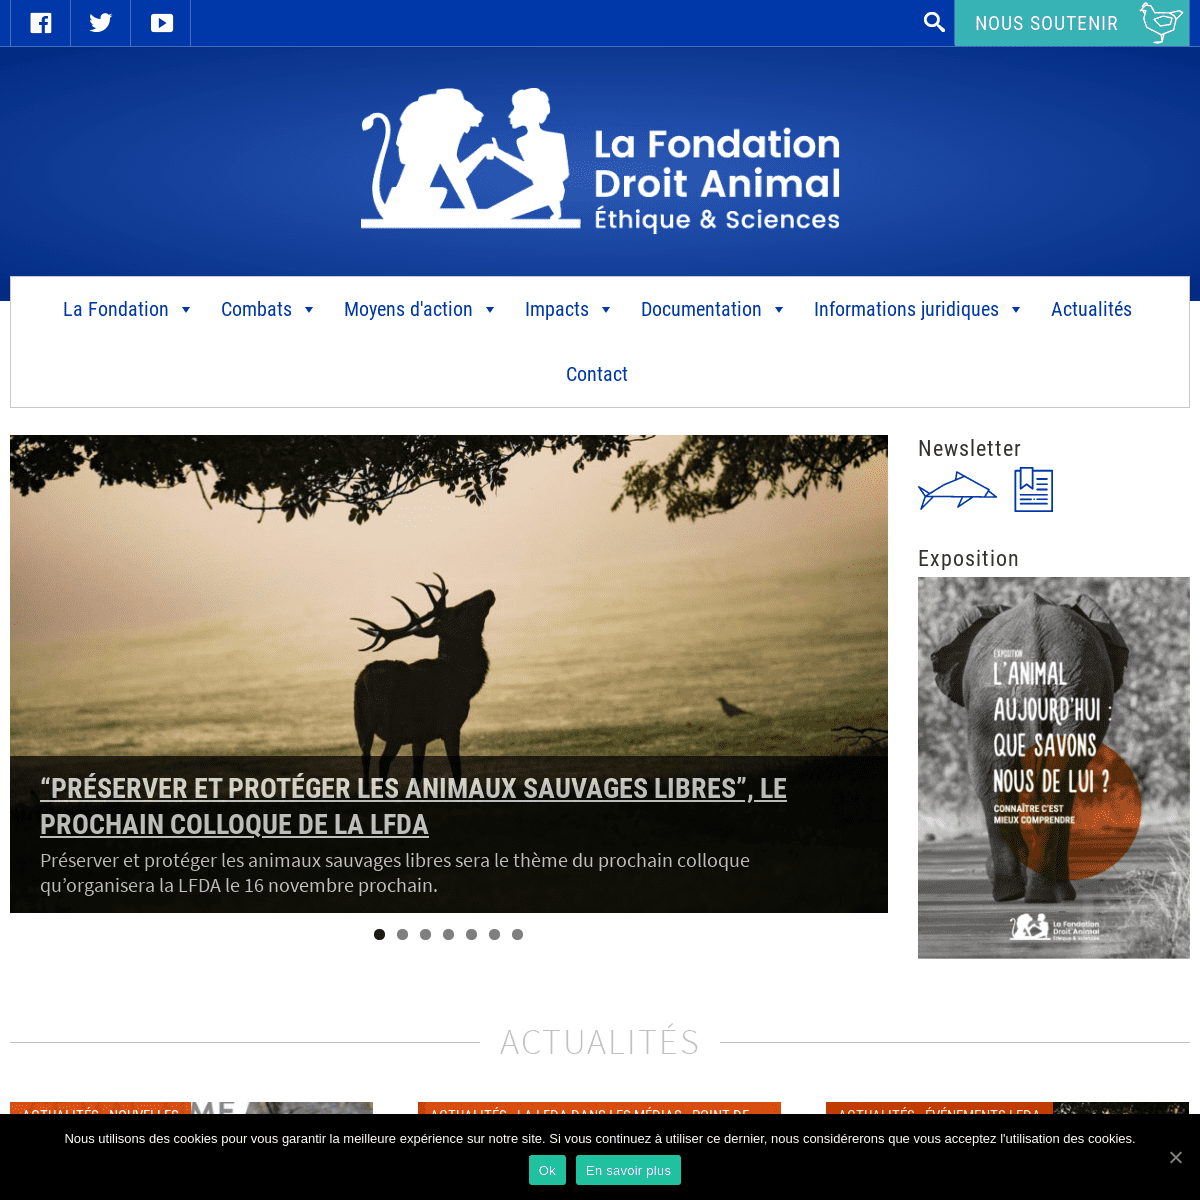 A complete backup of https://fondation-droit-animal.org